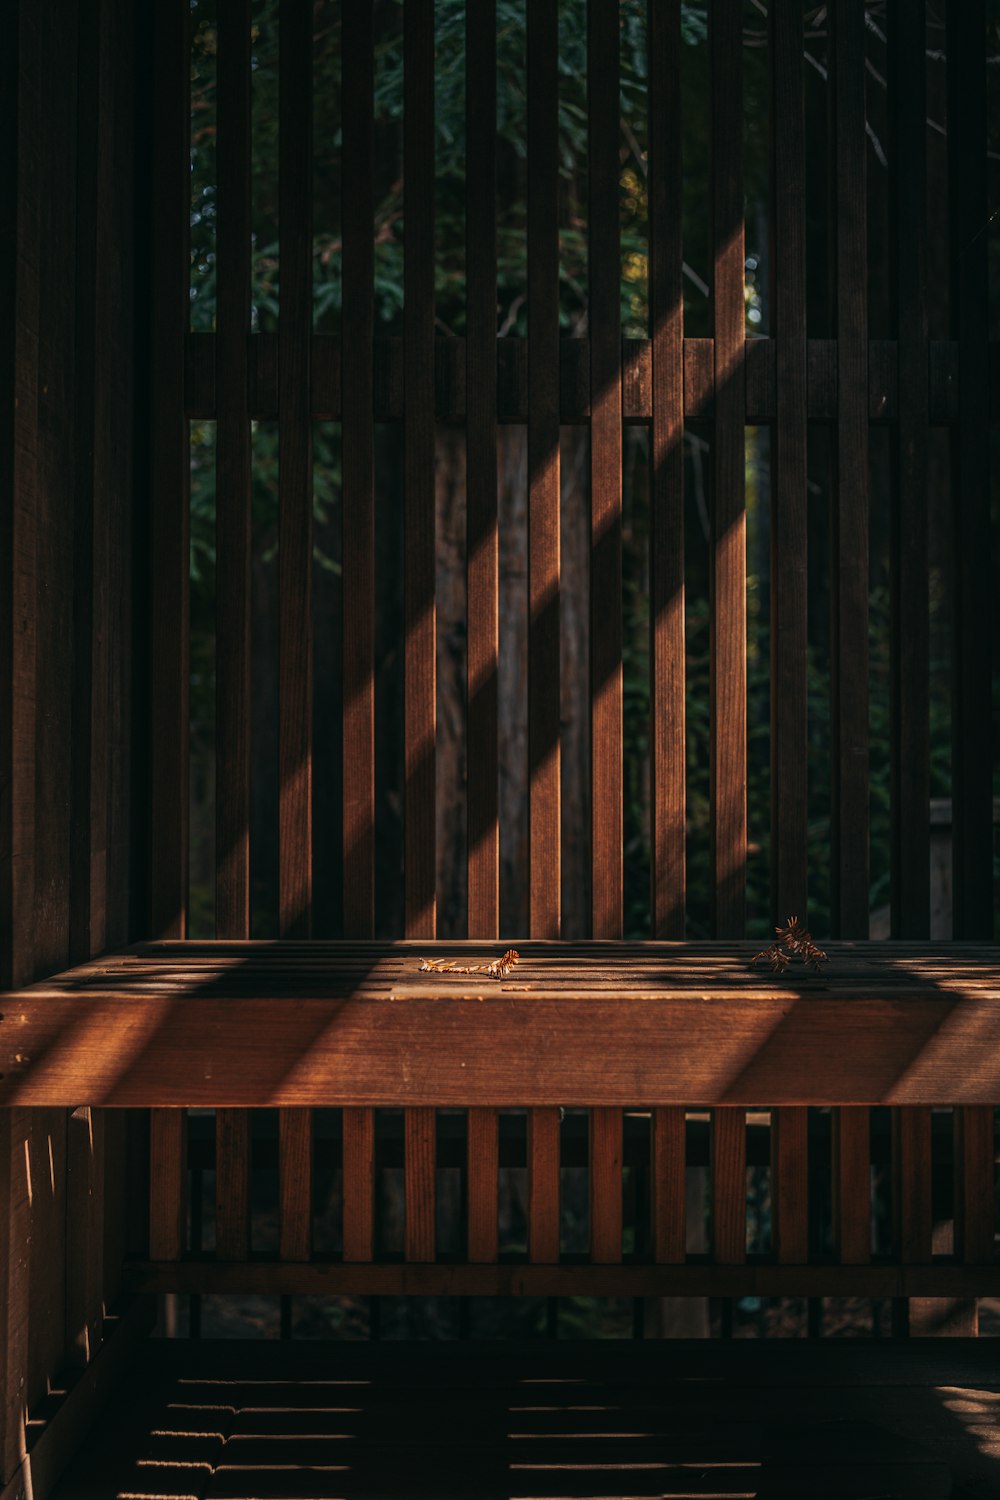 a wooden bench sitting in front of a wooden fence